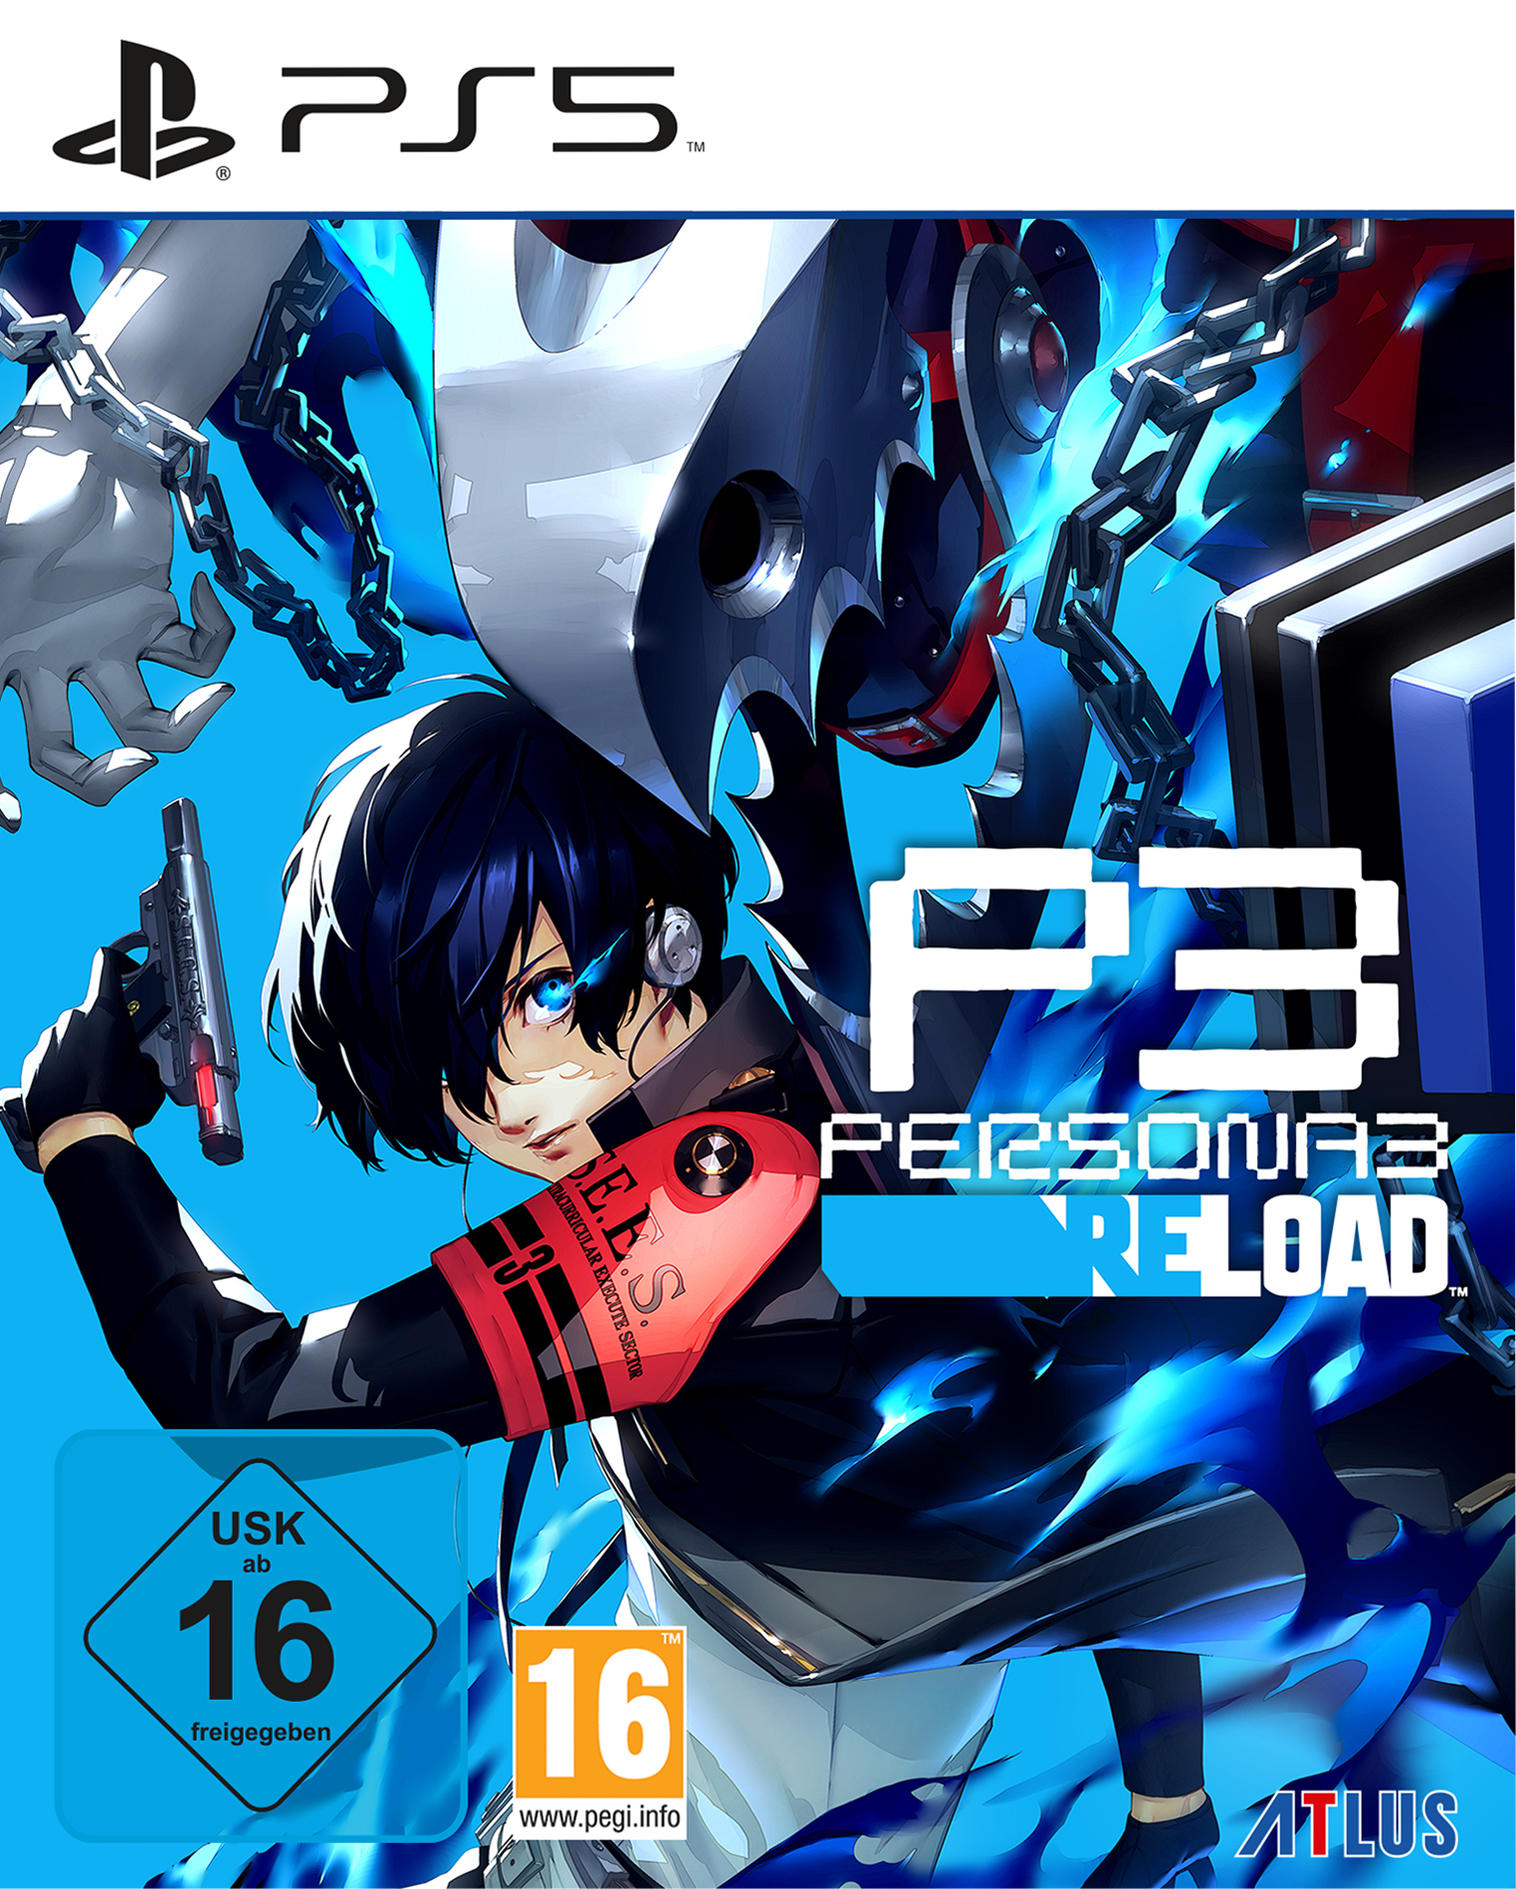 Reload 3 [PlayStation 5] - Persona